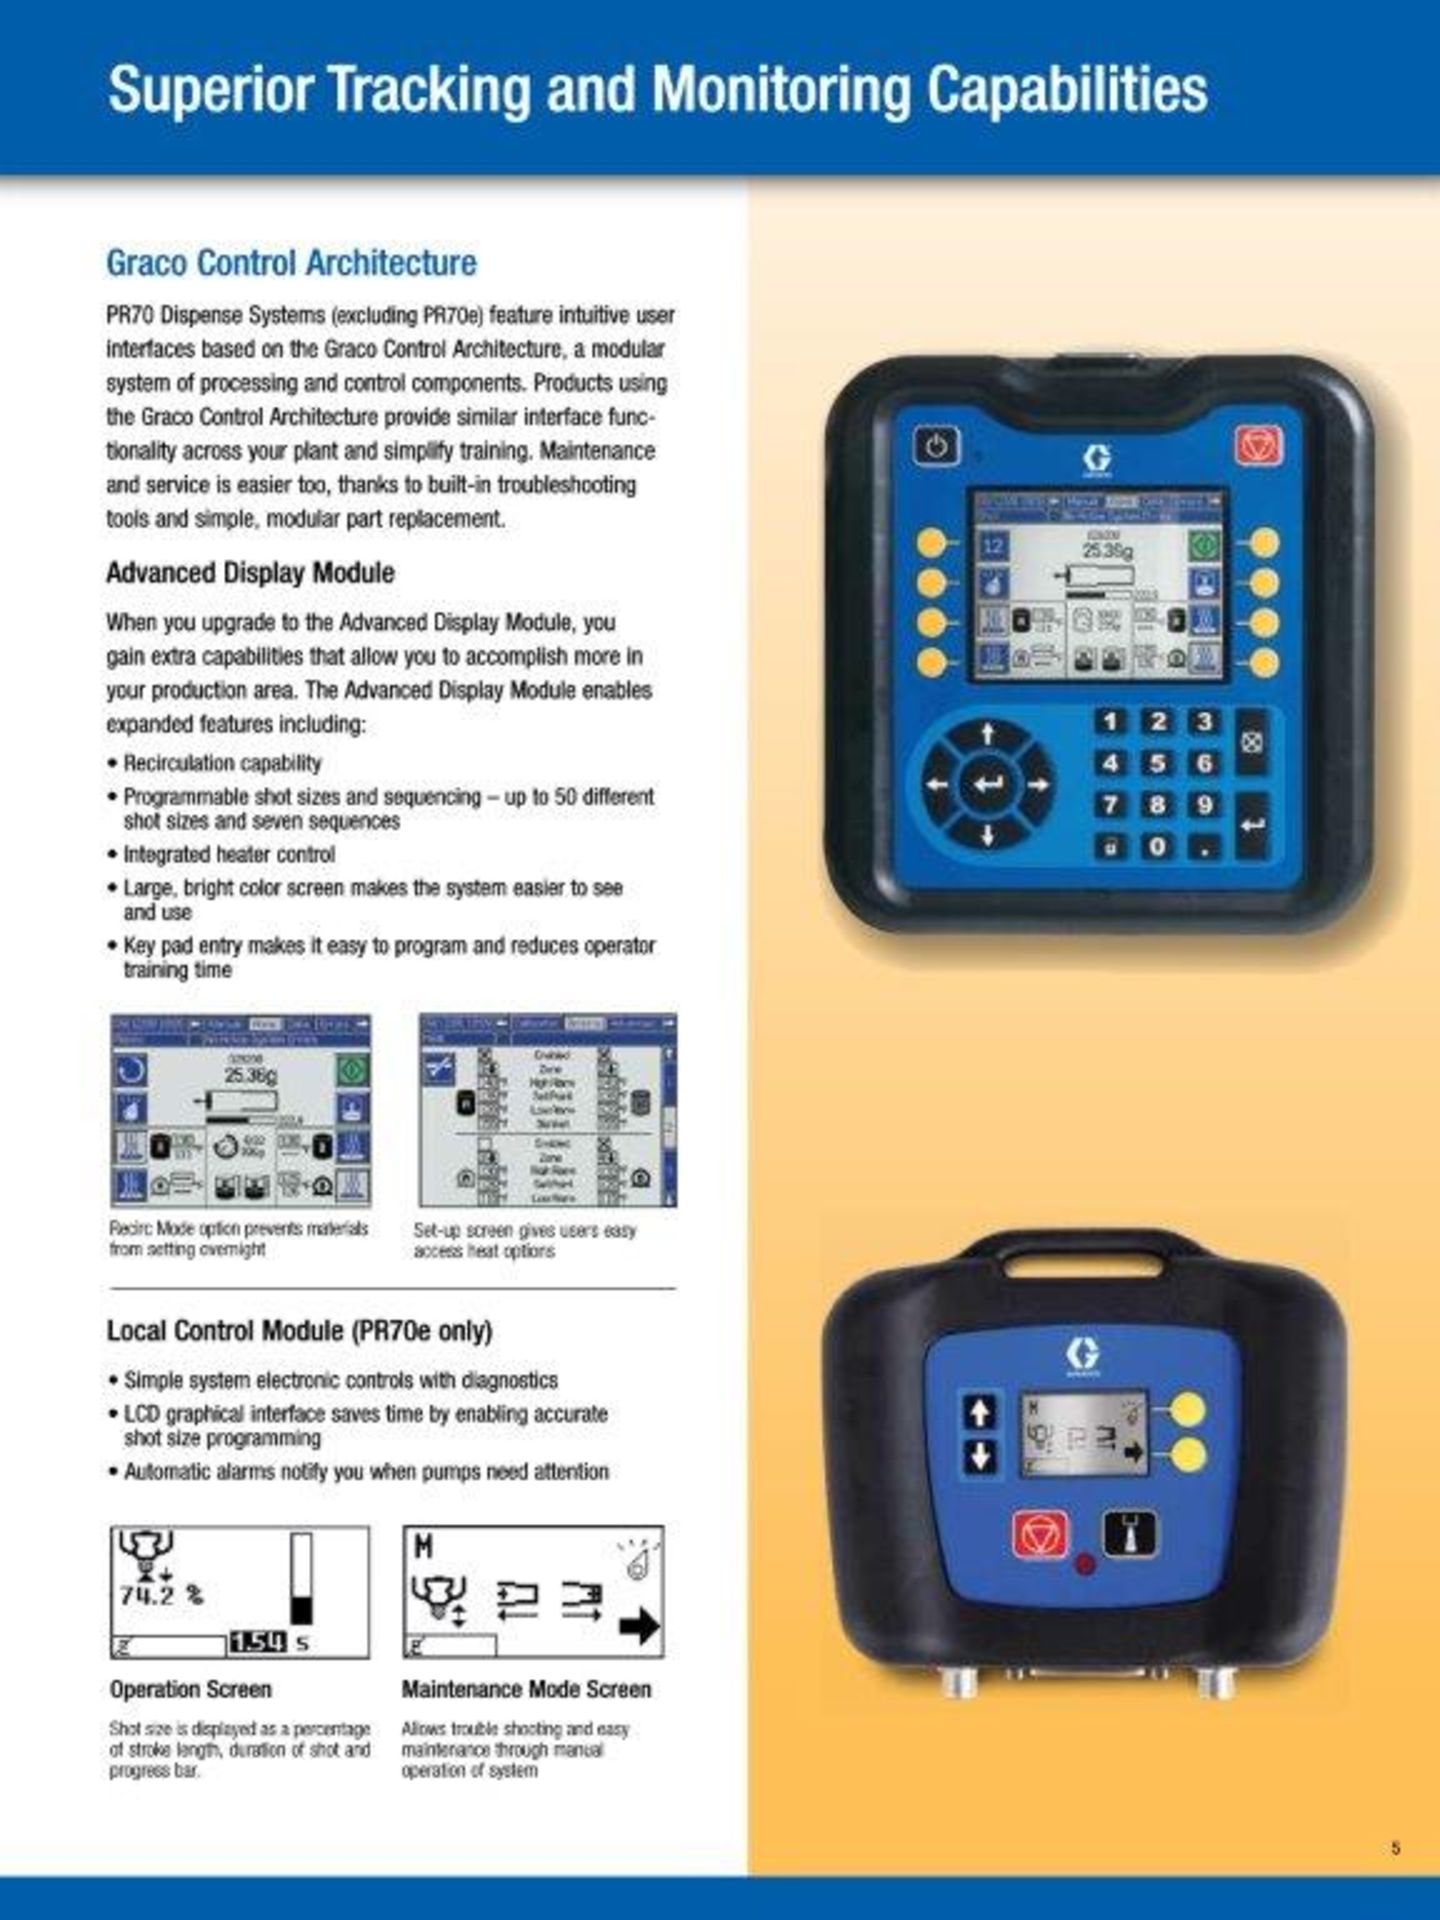 Graco PR70™ Meter, Mix and Dispense Systems (PDF manual available in photos) - Image 12 of 15